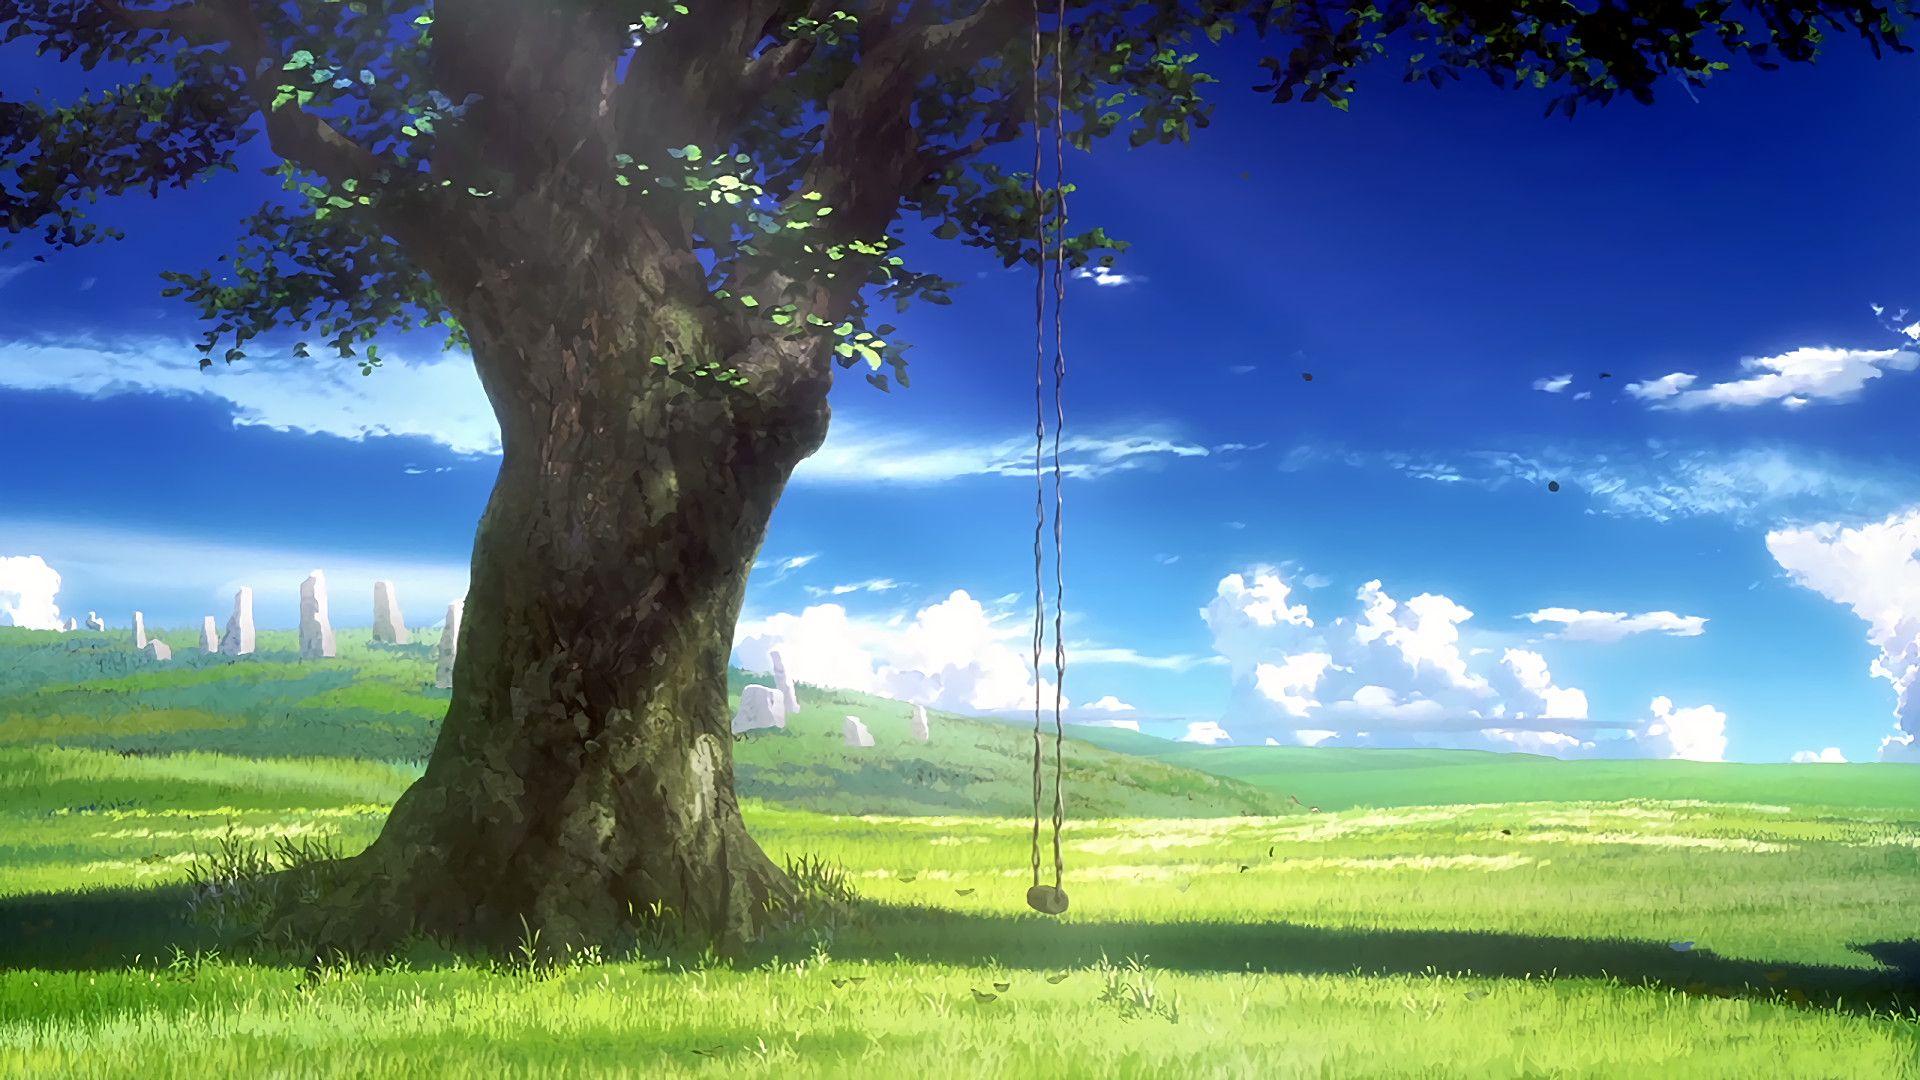 HD Wallpaper. Background. 1920x1080 Anime Shelter 1920x1080. Anime background, Anime scenery, Anime background wallpaper